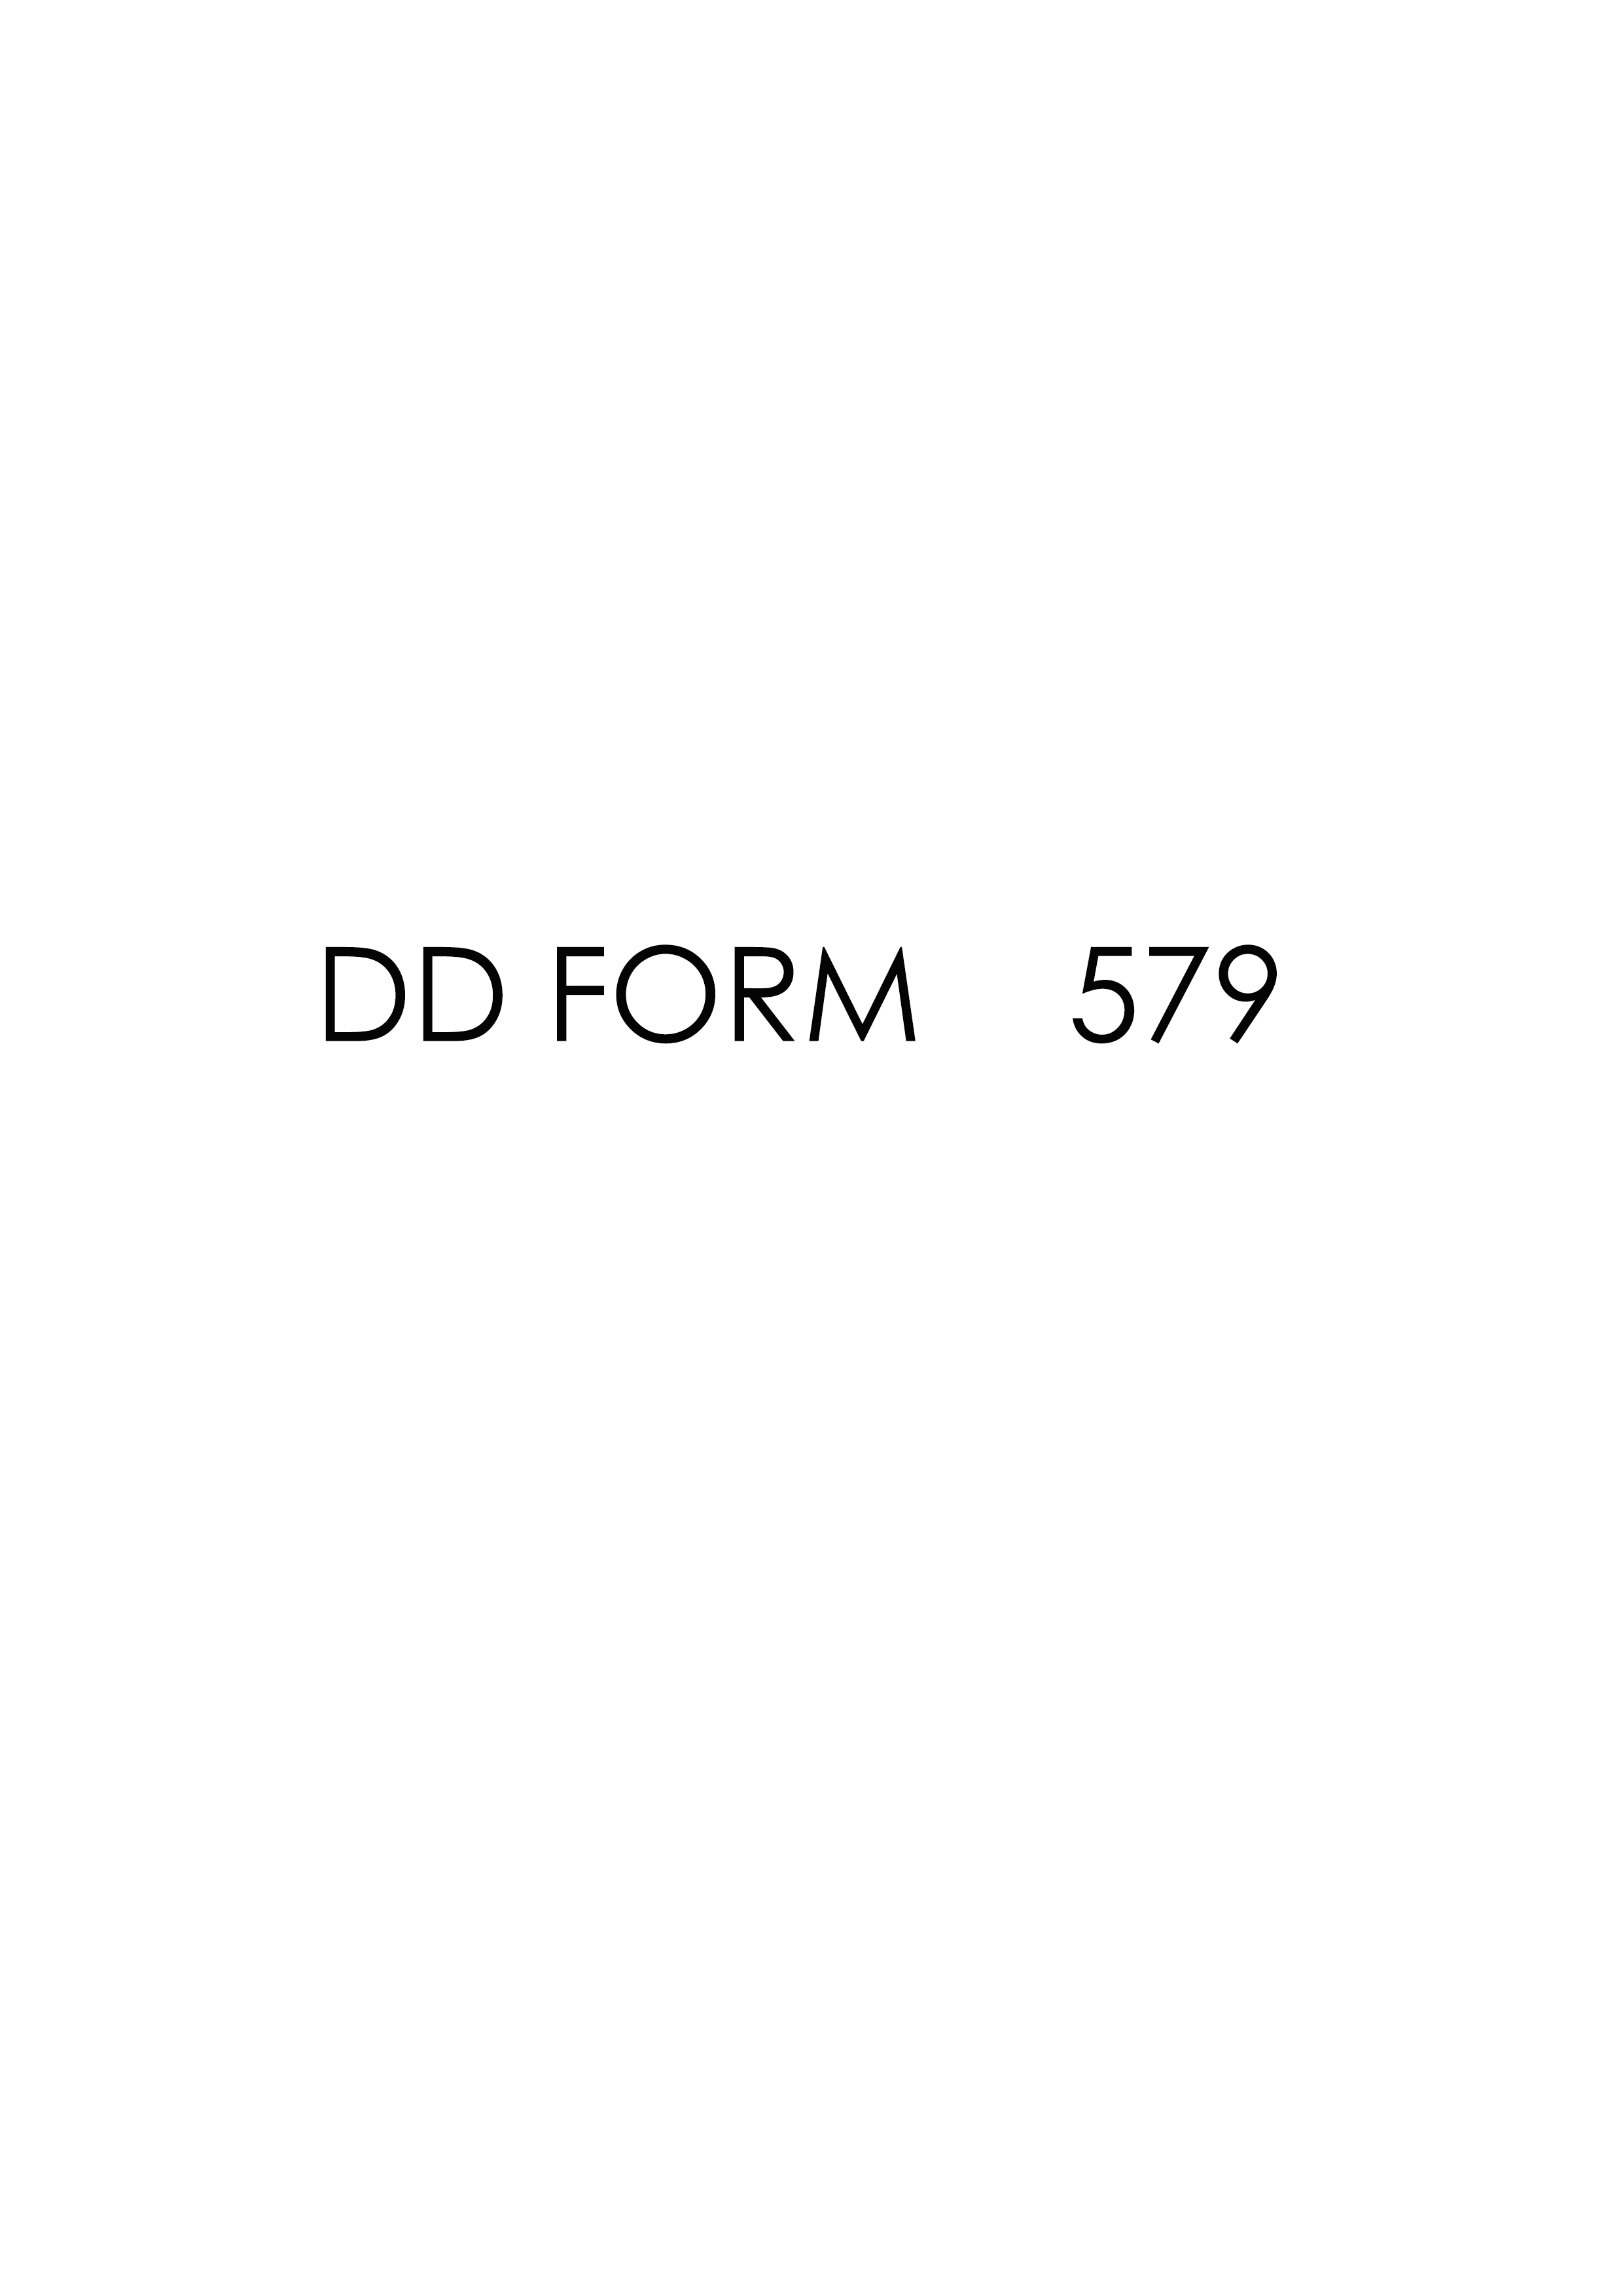 Download Fillable dd Form 579